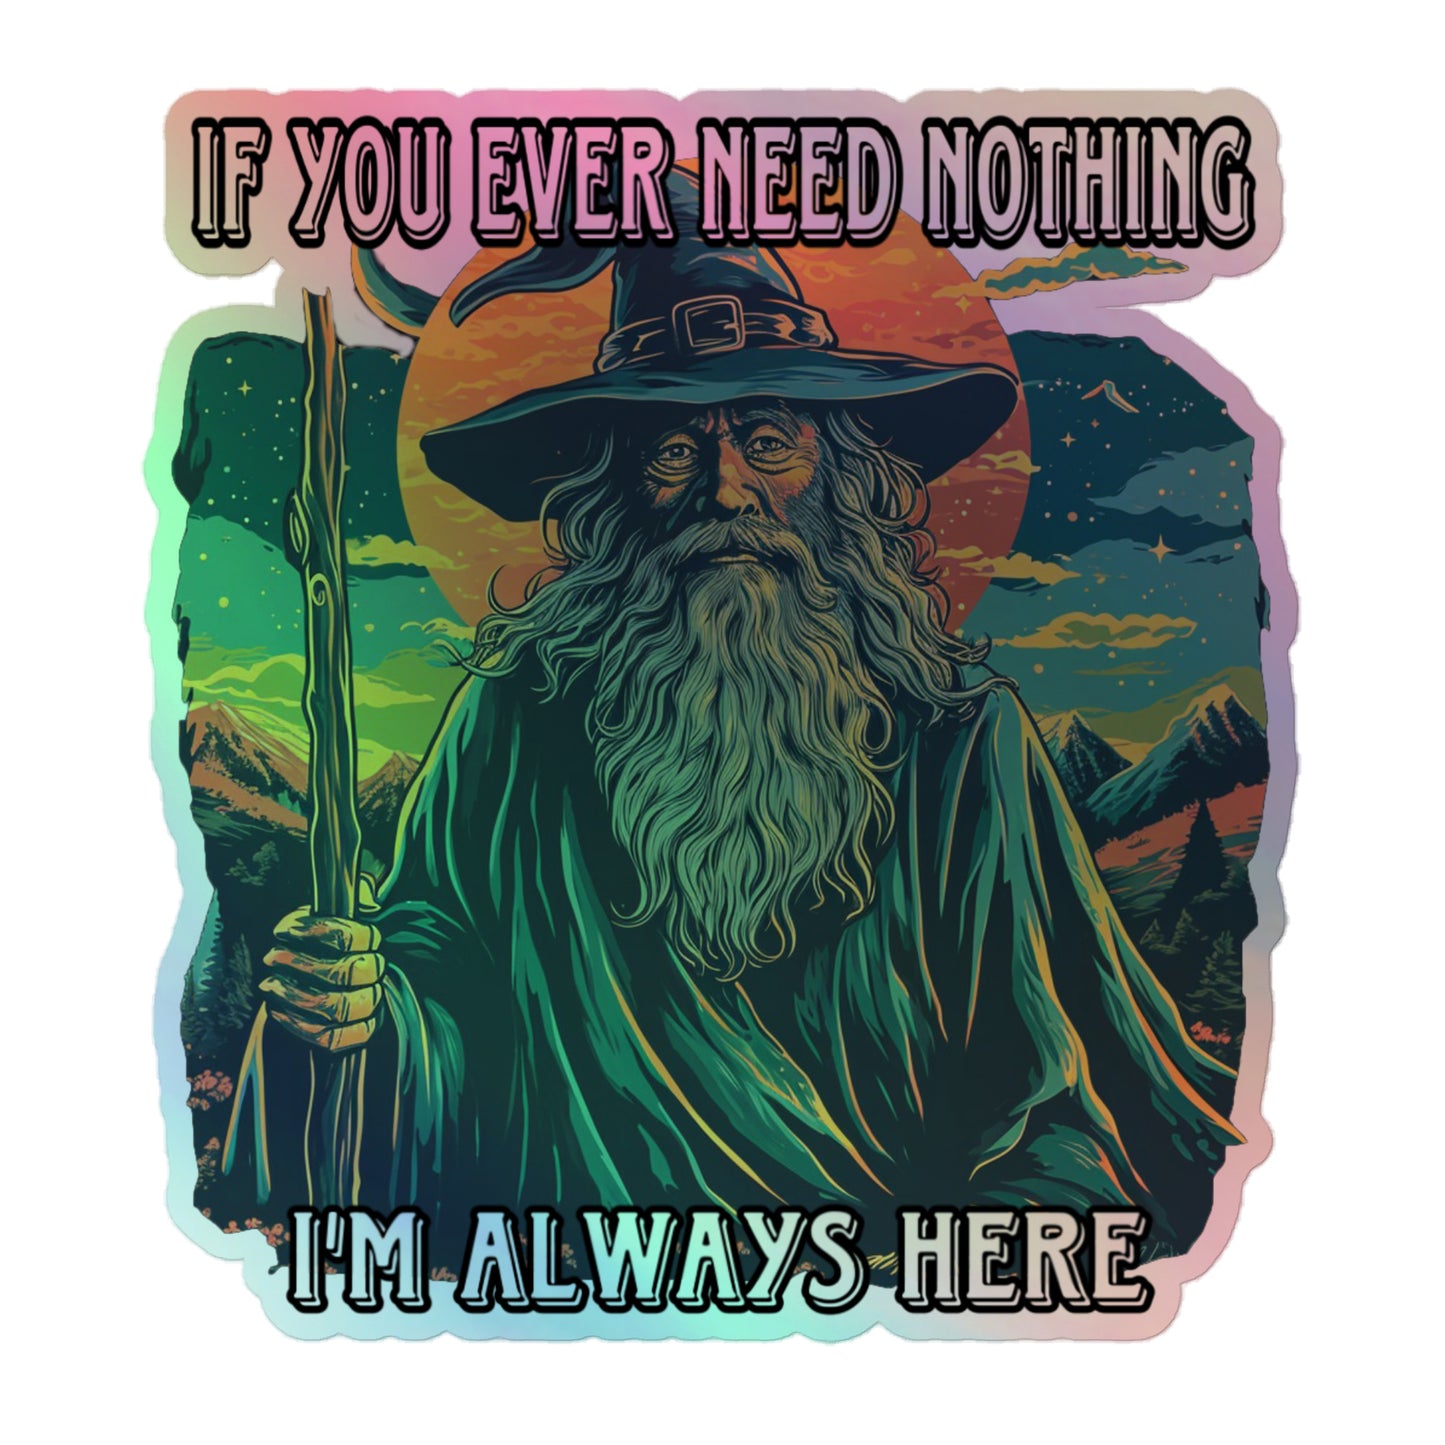 If you ever need nothing I’m always here Holographic sticker